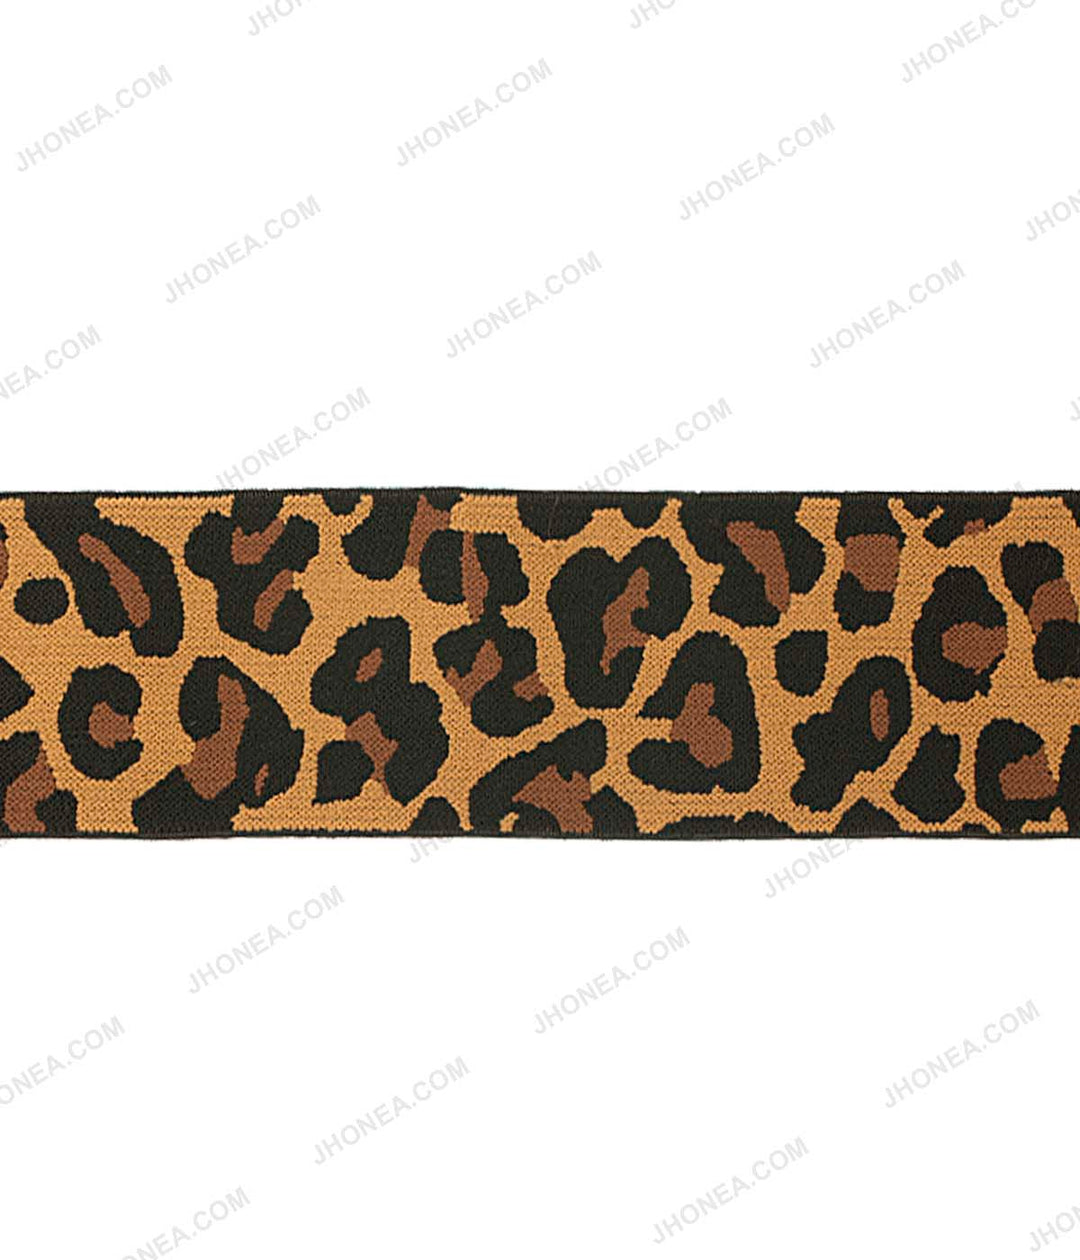 5cm (2inch) Black with Brown Leopard Print Soft Woven Elastic